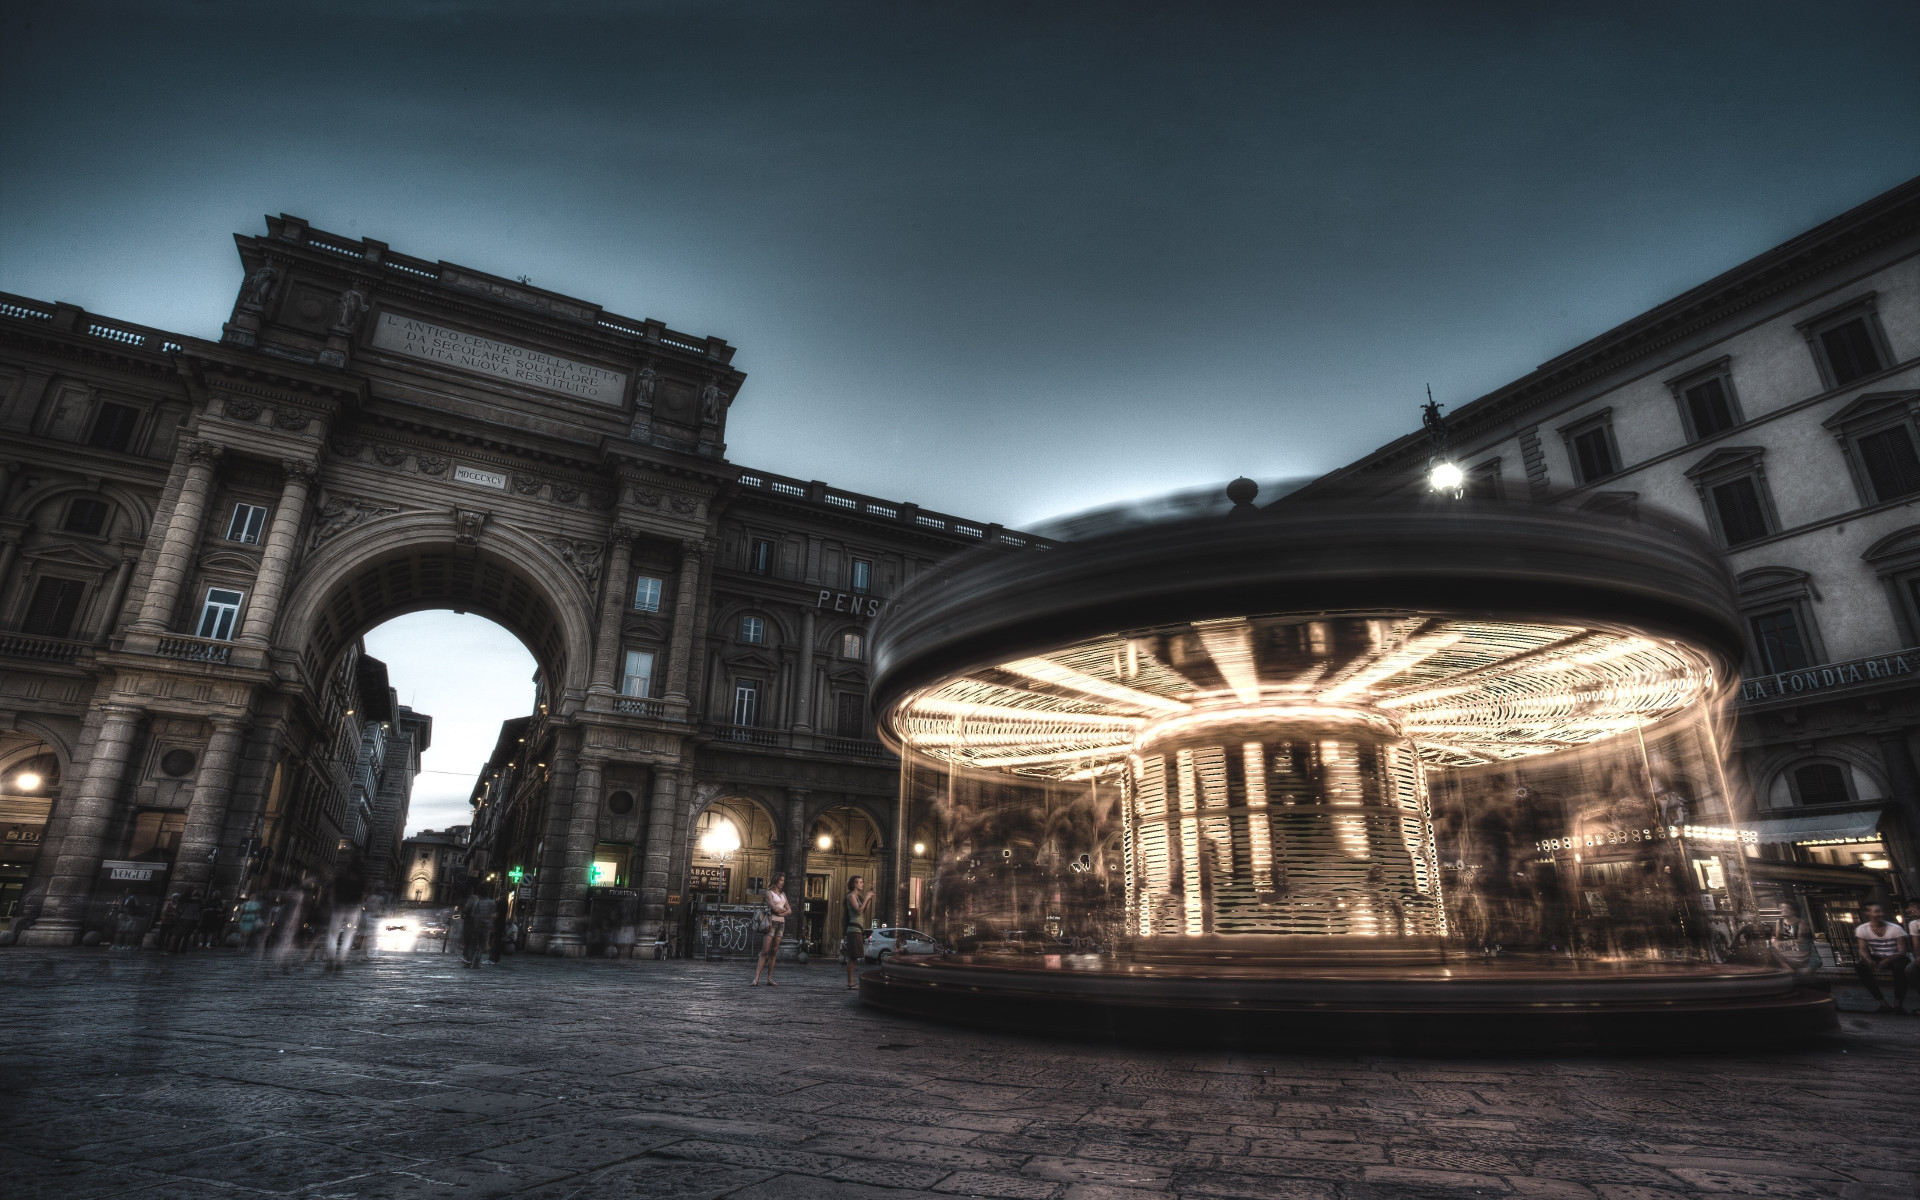 Carousel, people and buildings from Florence wallpaper 1920x1200